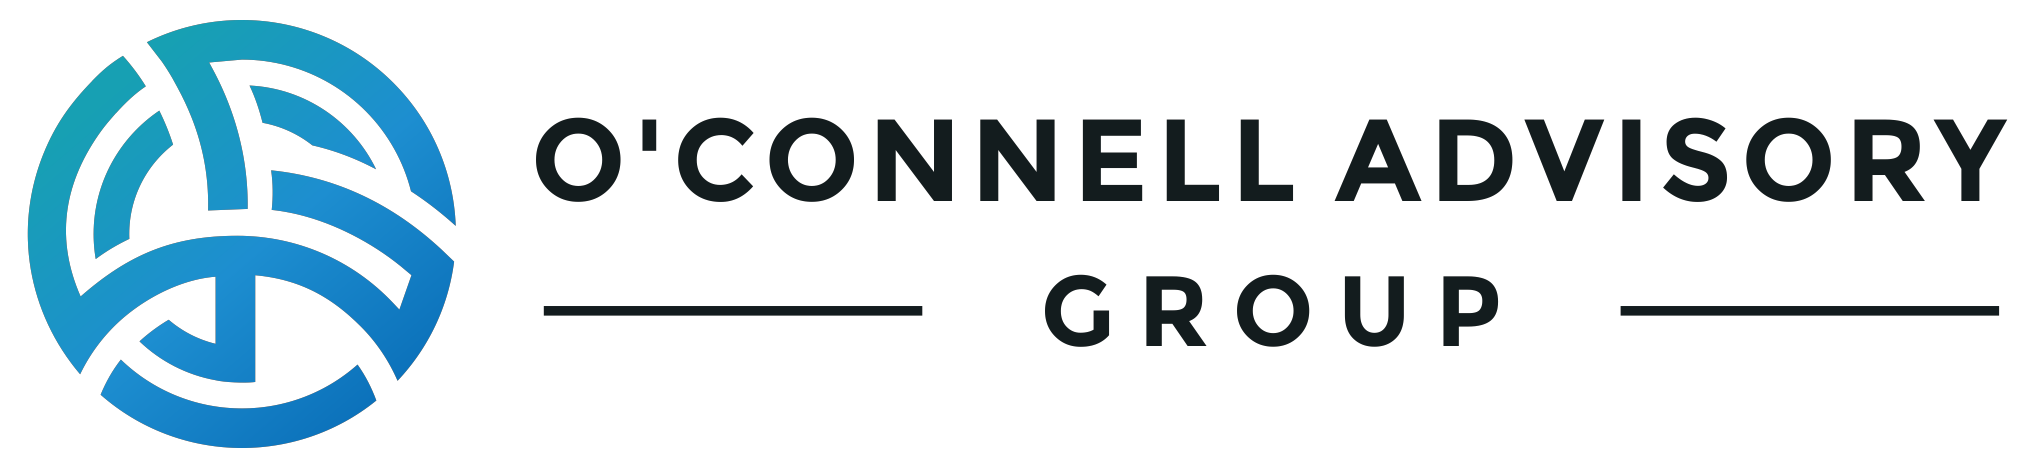 O'Connell Advisory Group